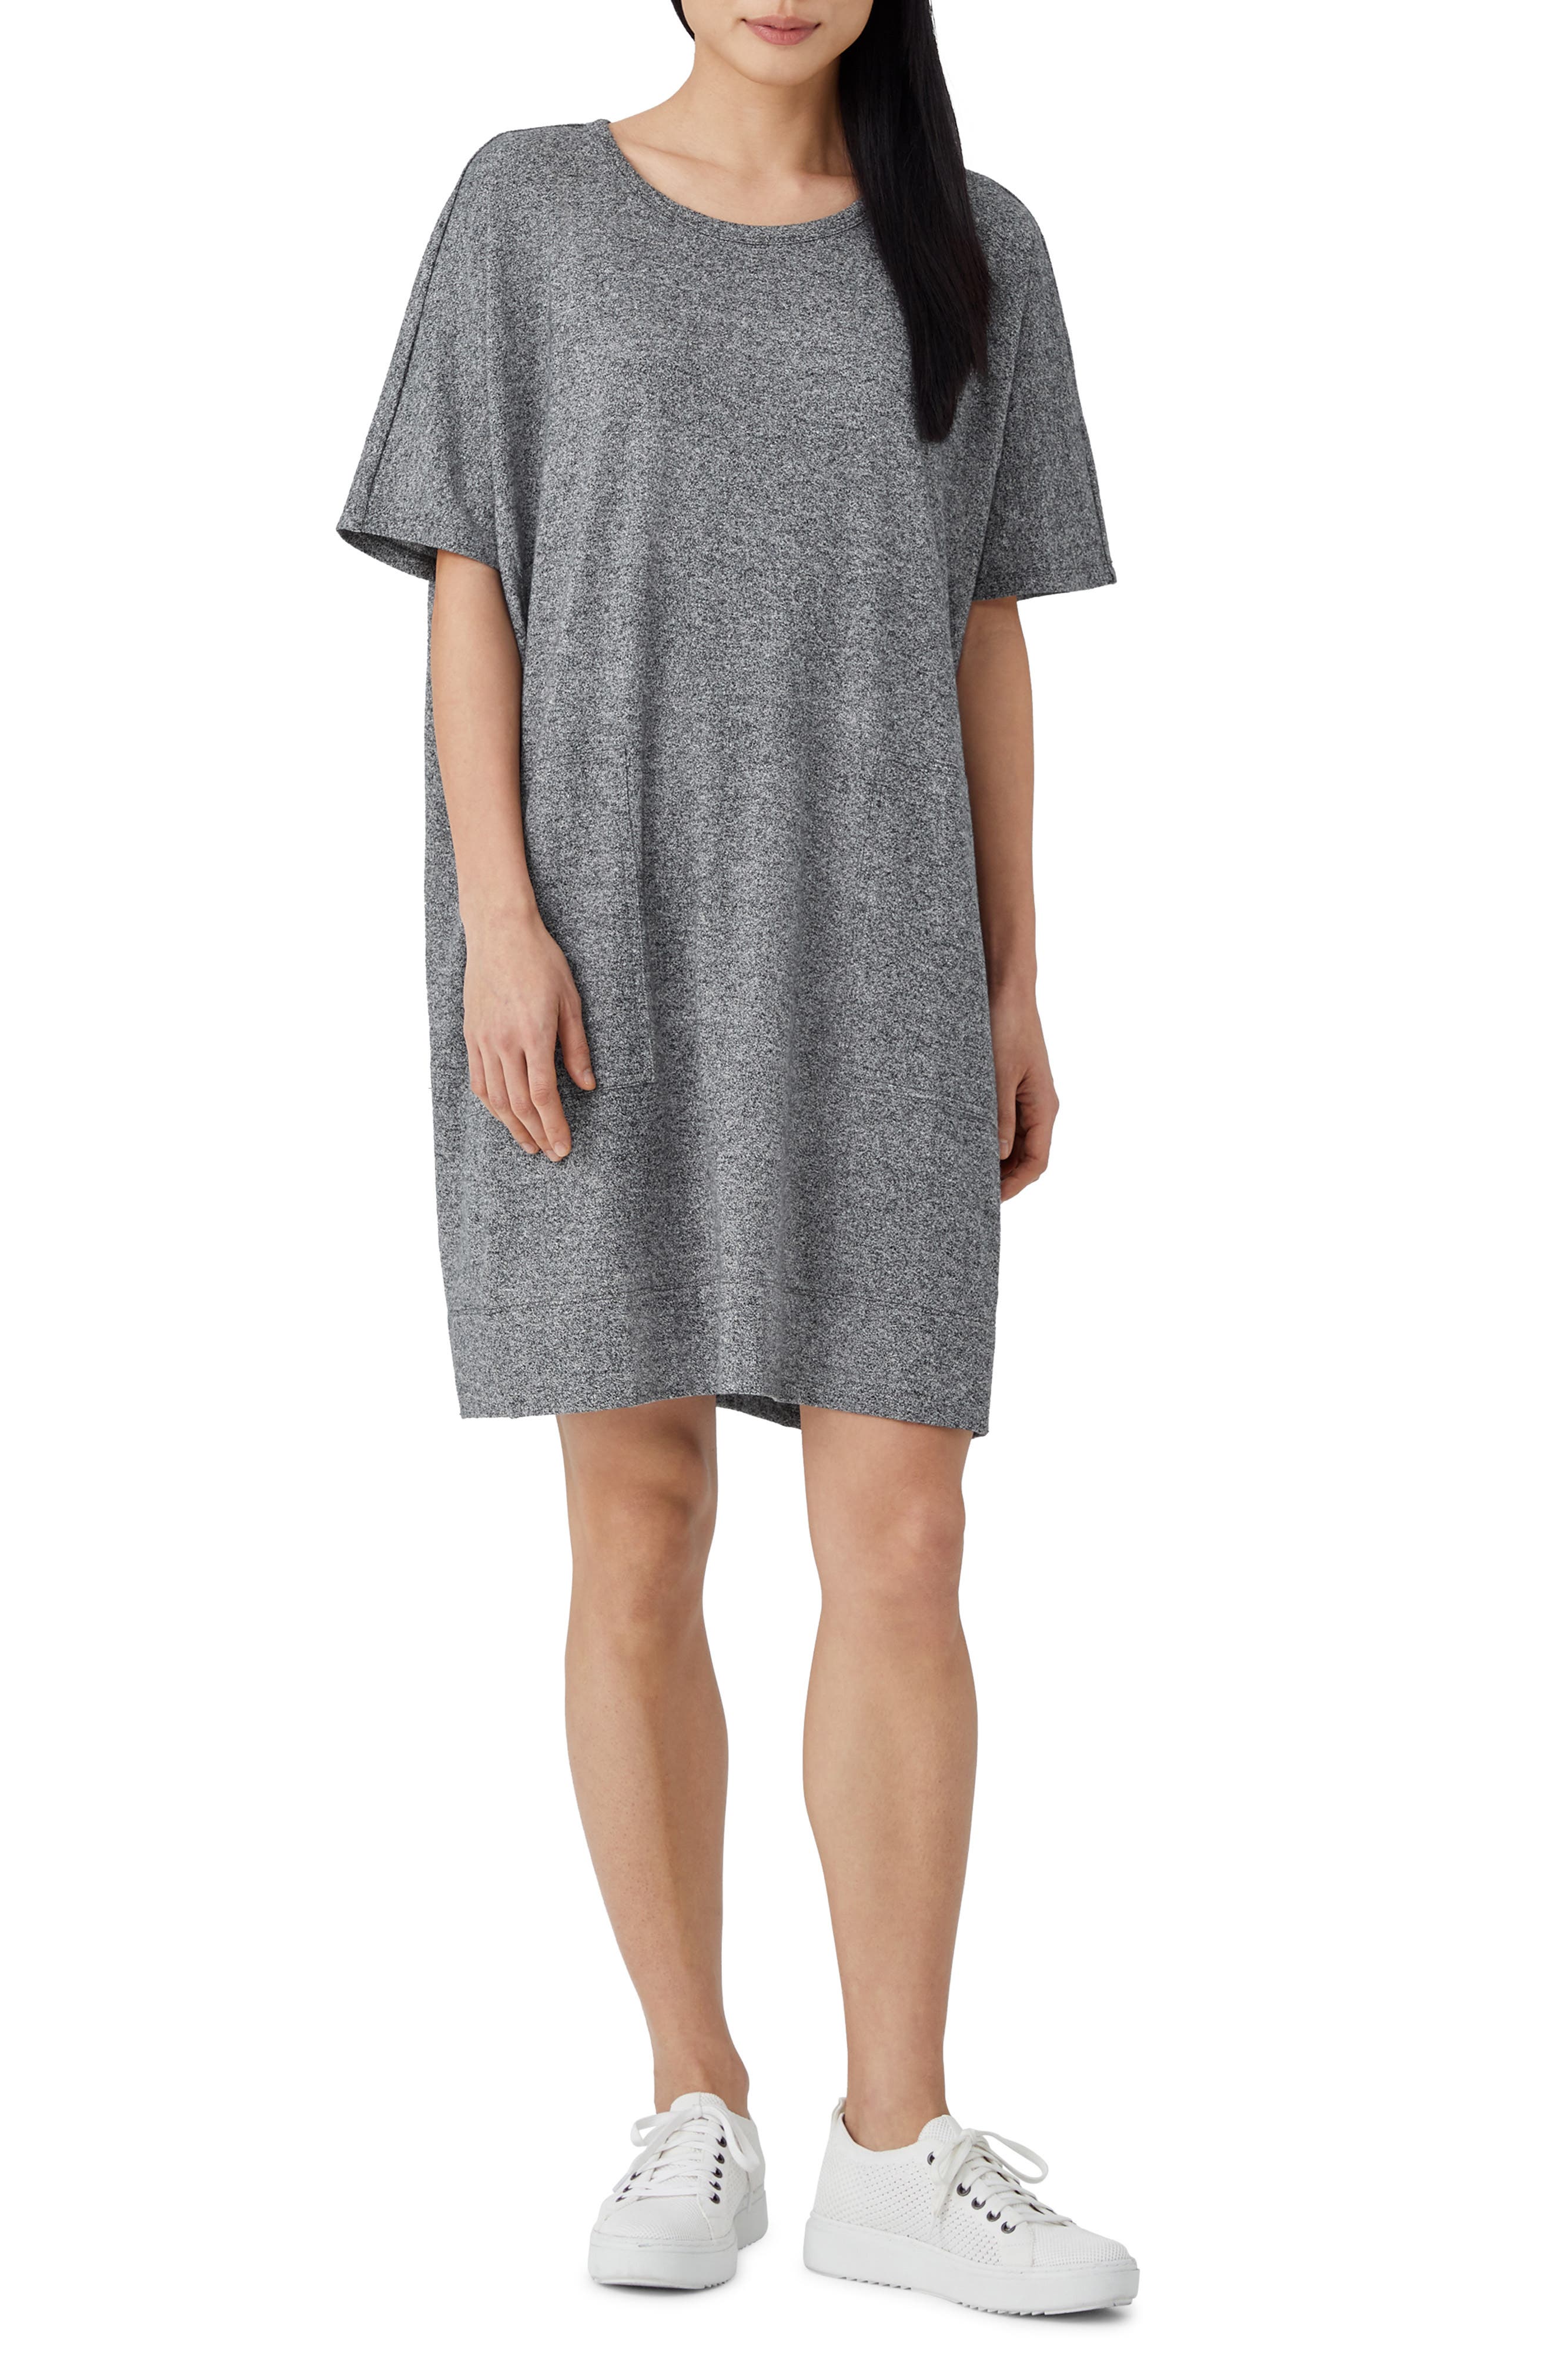 Eileen Fisher Organic Cotton Blend T-Shirt Dress in Ash at Nordstrom